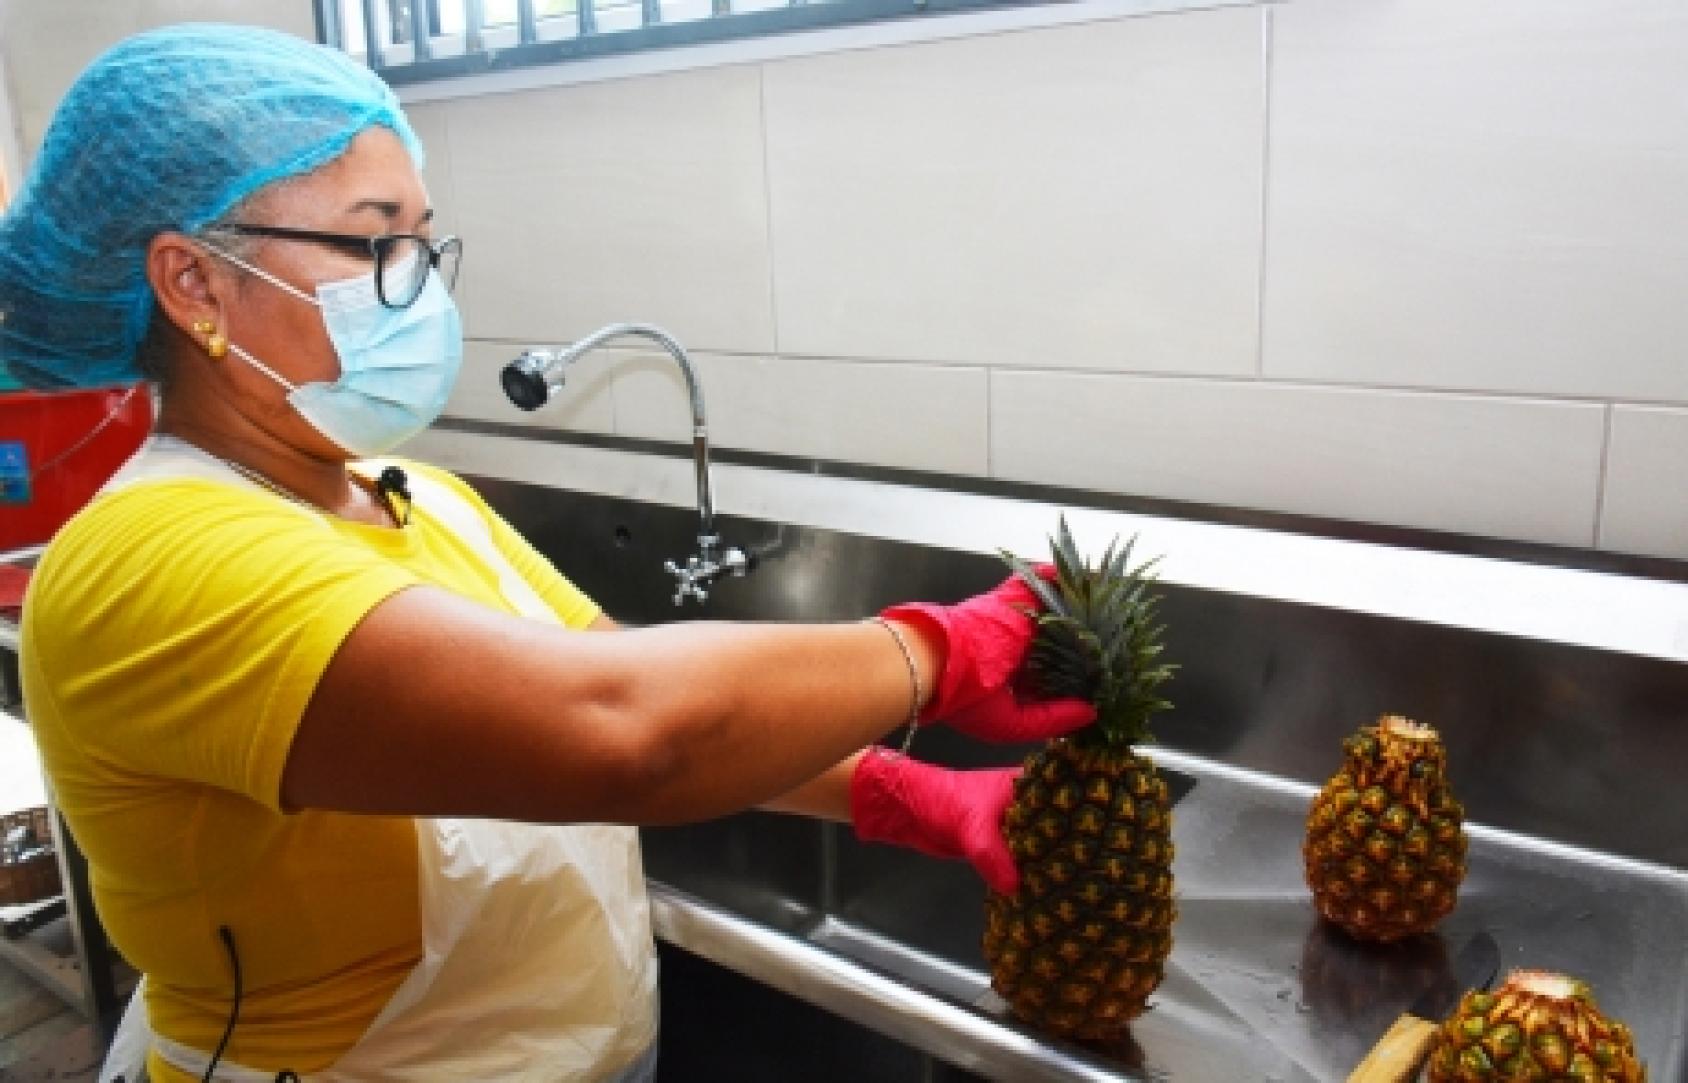 A woman, wearing a facemask, gloves, hair cover and a yellow blouse, is holding a pineapple in an industrial sink.